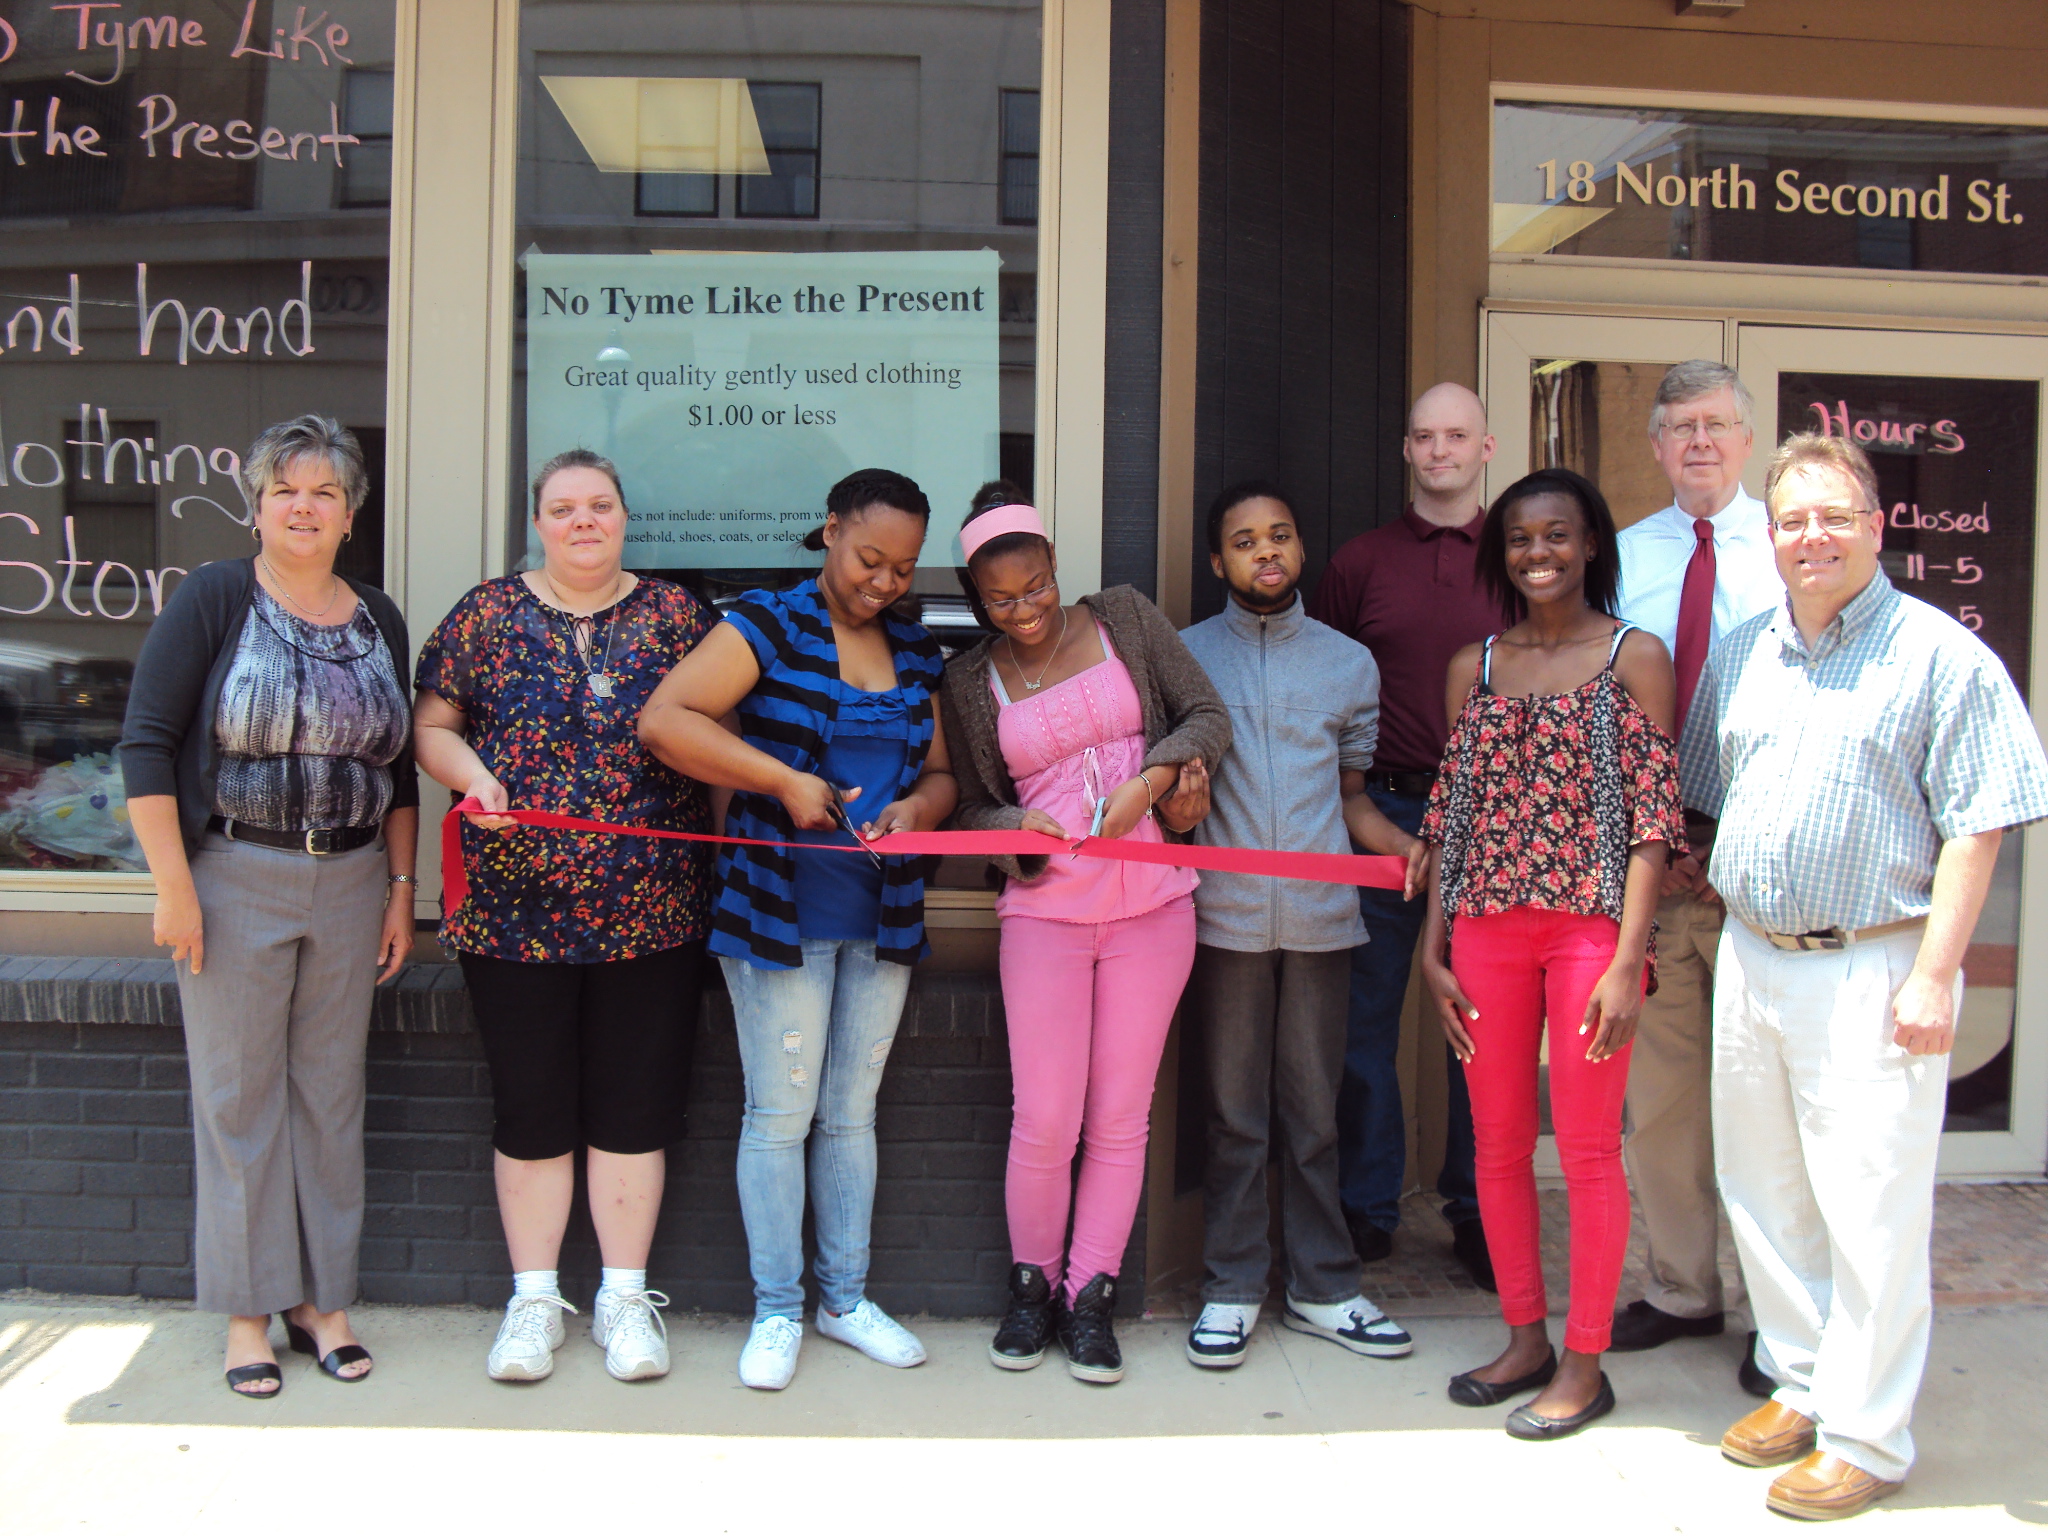 (Provided Photo)Left to right is: Main Street Manager, Loretta Wagner (CRC), Cindy Poole, Owner Elaine Newkirk, Shante Newkirk, Jaire Newkirk, , Dominique Newkirk, and Commissioner Mark McCracken. 
Second Row: Shawn McCully, and Commissioner John Sobel.